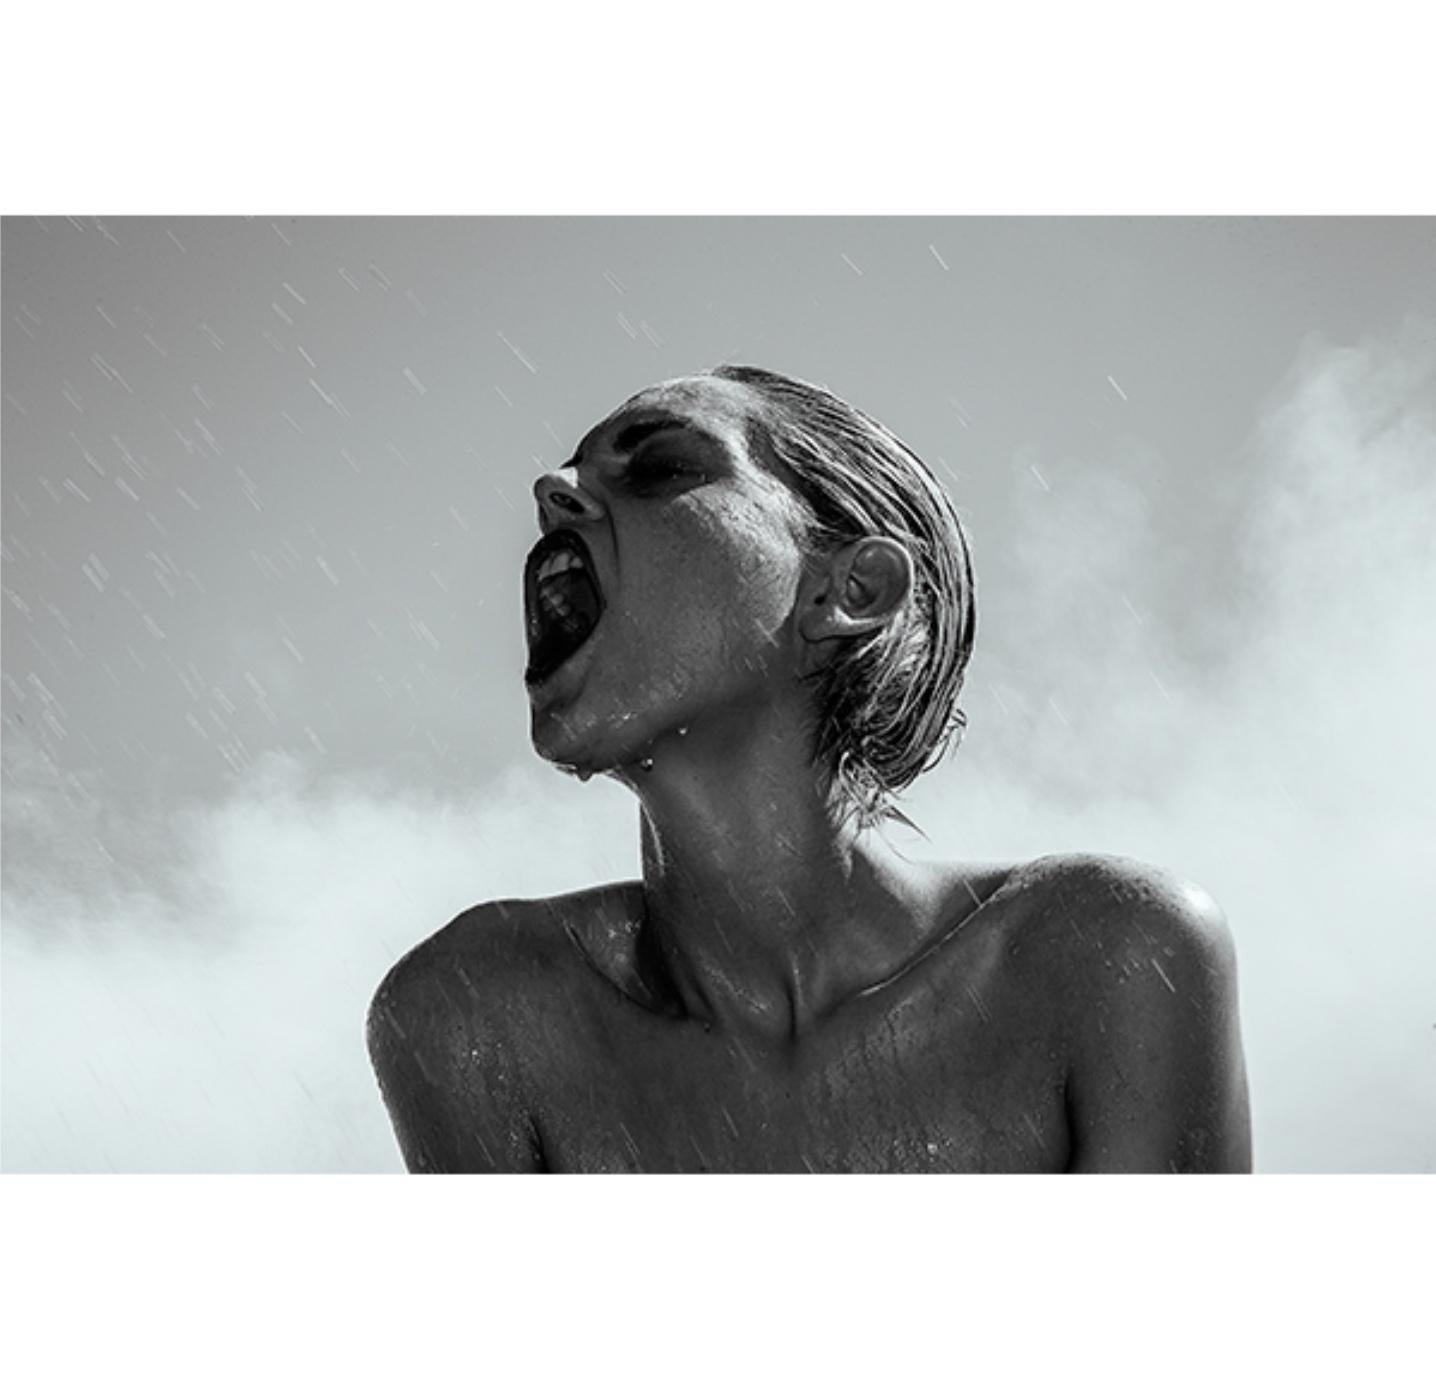 Series: Provocateur
C-Type Photographic Print on 5mm Foam-board
All available sizes and editions:
20" x 30"
30" x 40"
40" x 60"
48" x 72"
63" x 84"
Editions of 3 + 2 Artist Proofs

Tyler Shields is a photographer, film director, and writer, best